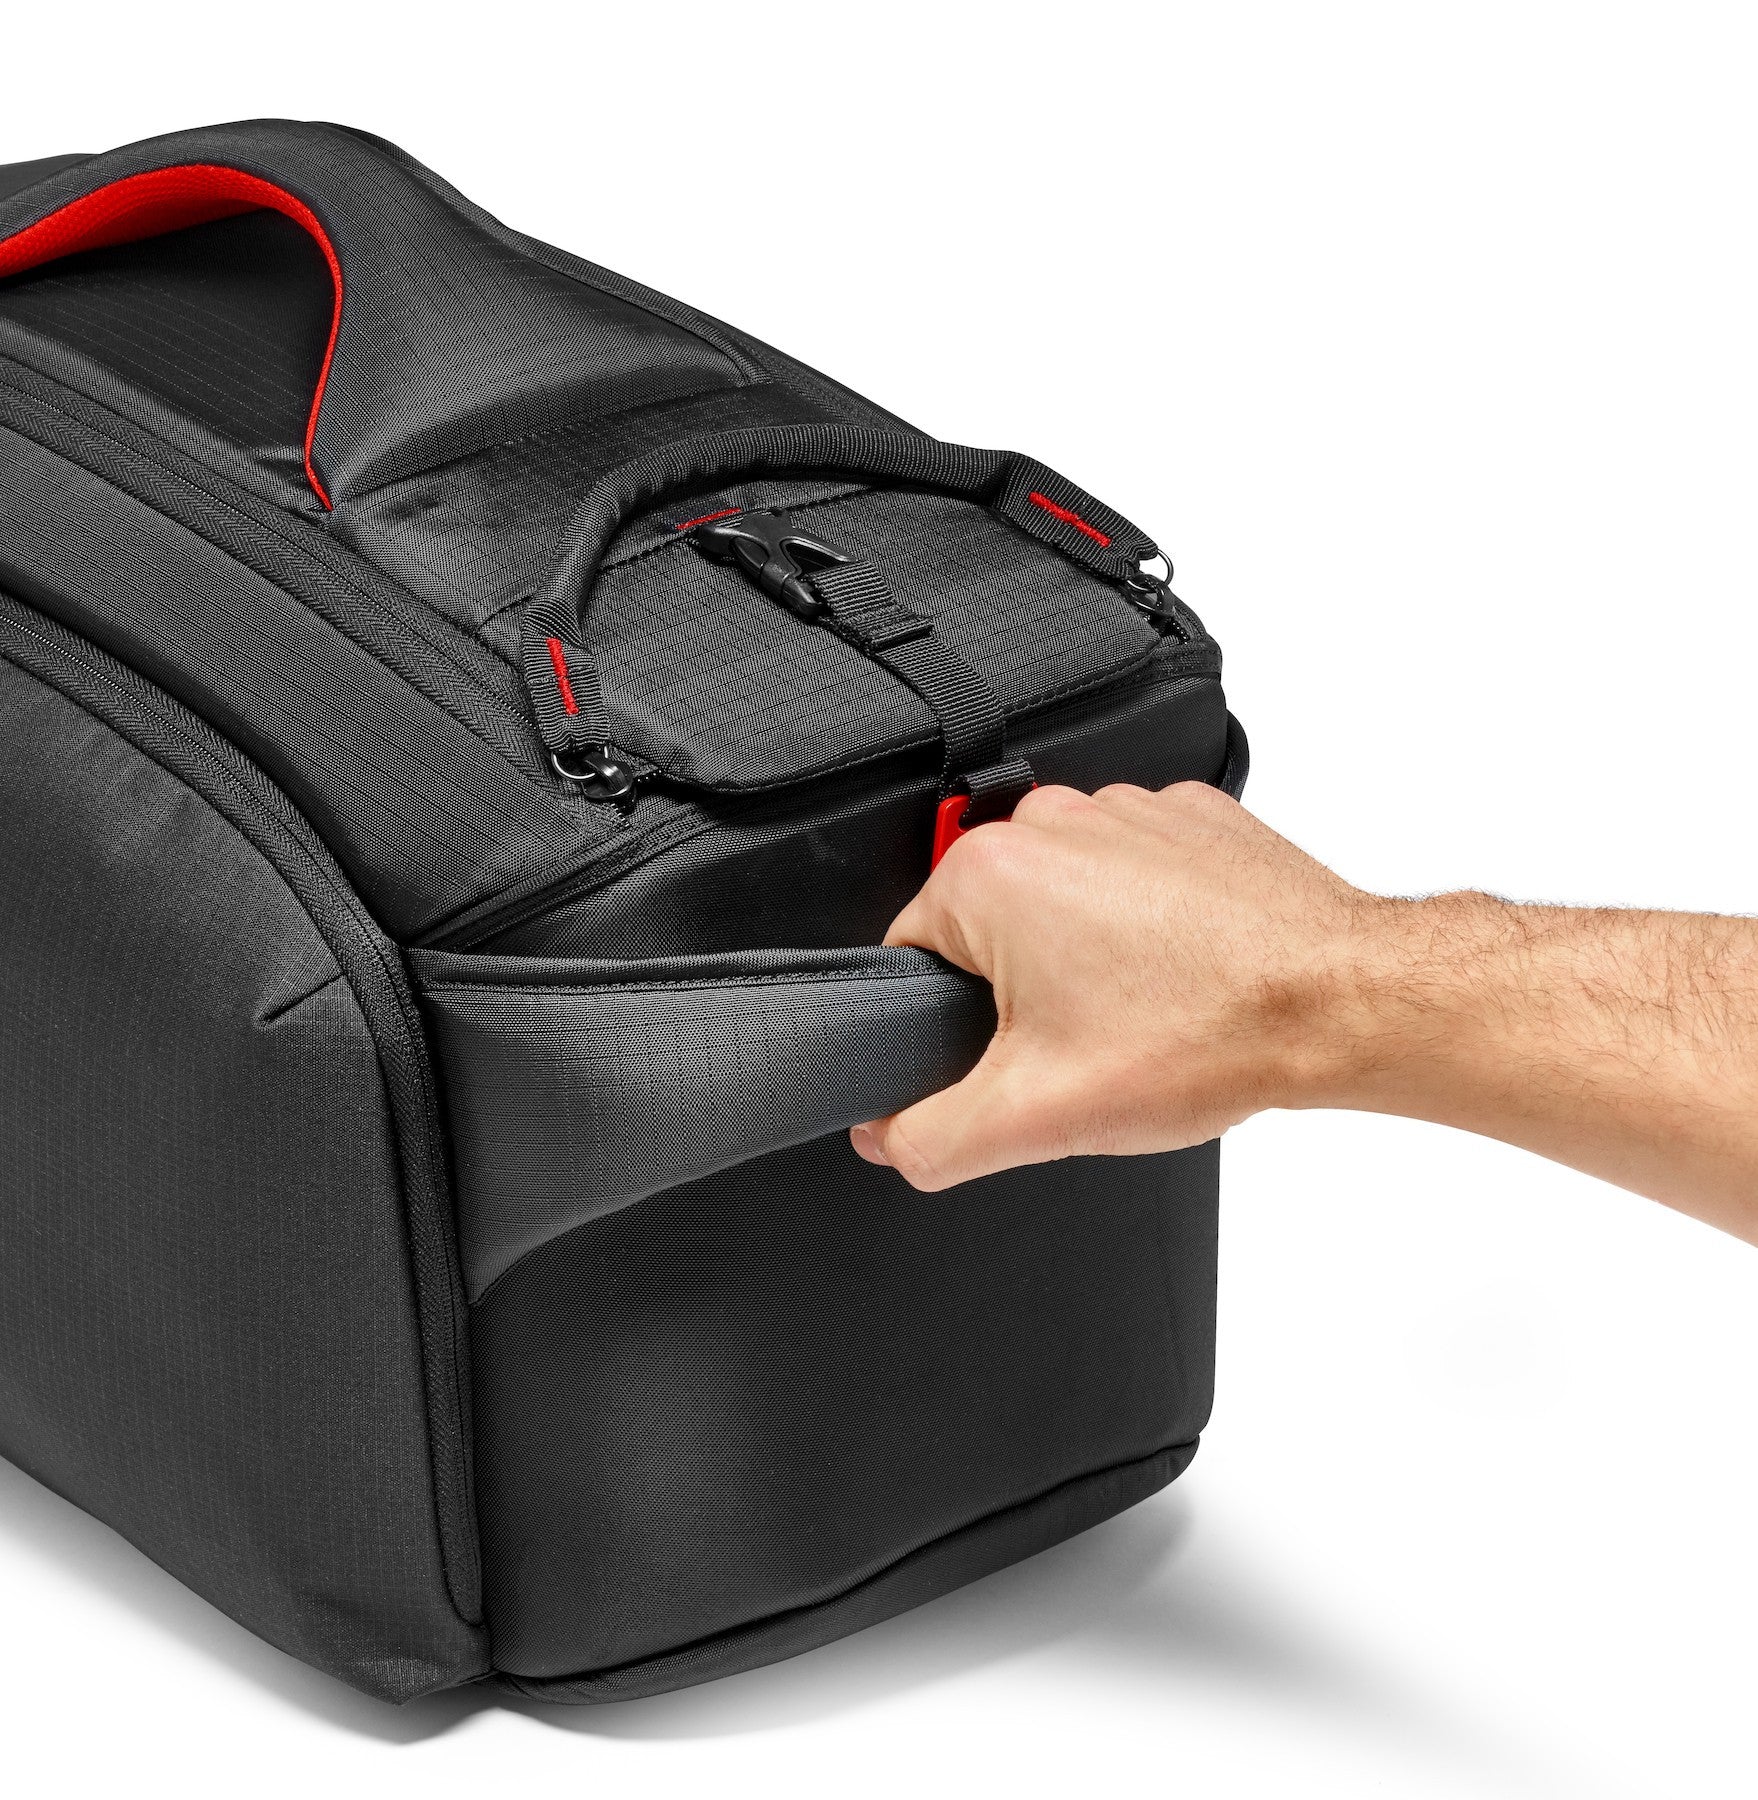 Manfrotto CC-191N Pro Light Video Case, bags soft cases, Manfrotto - Pictureline  - 8